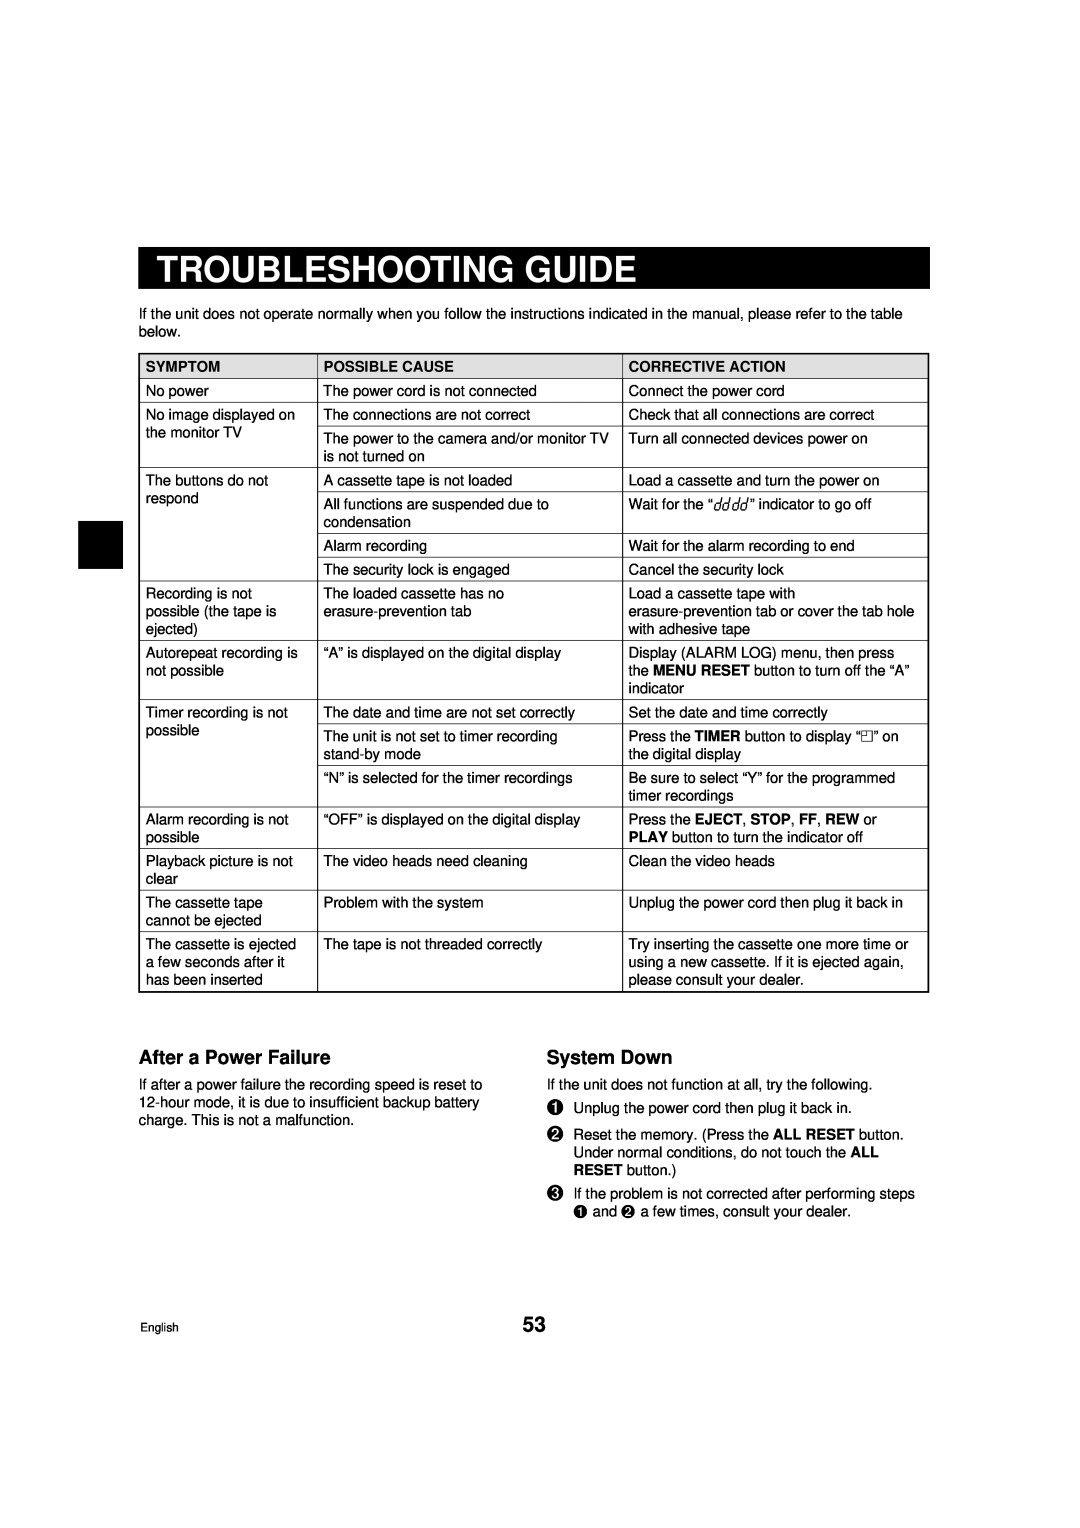 Sanyo DTL-4800, RD2QD/NA instruction manual Troubleshooting Guide, After a Power Failure, System Down 